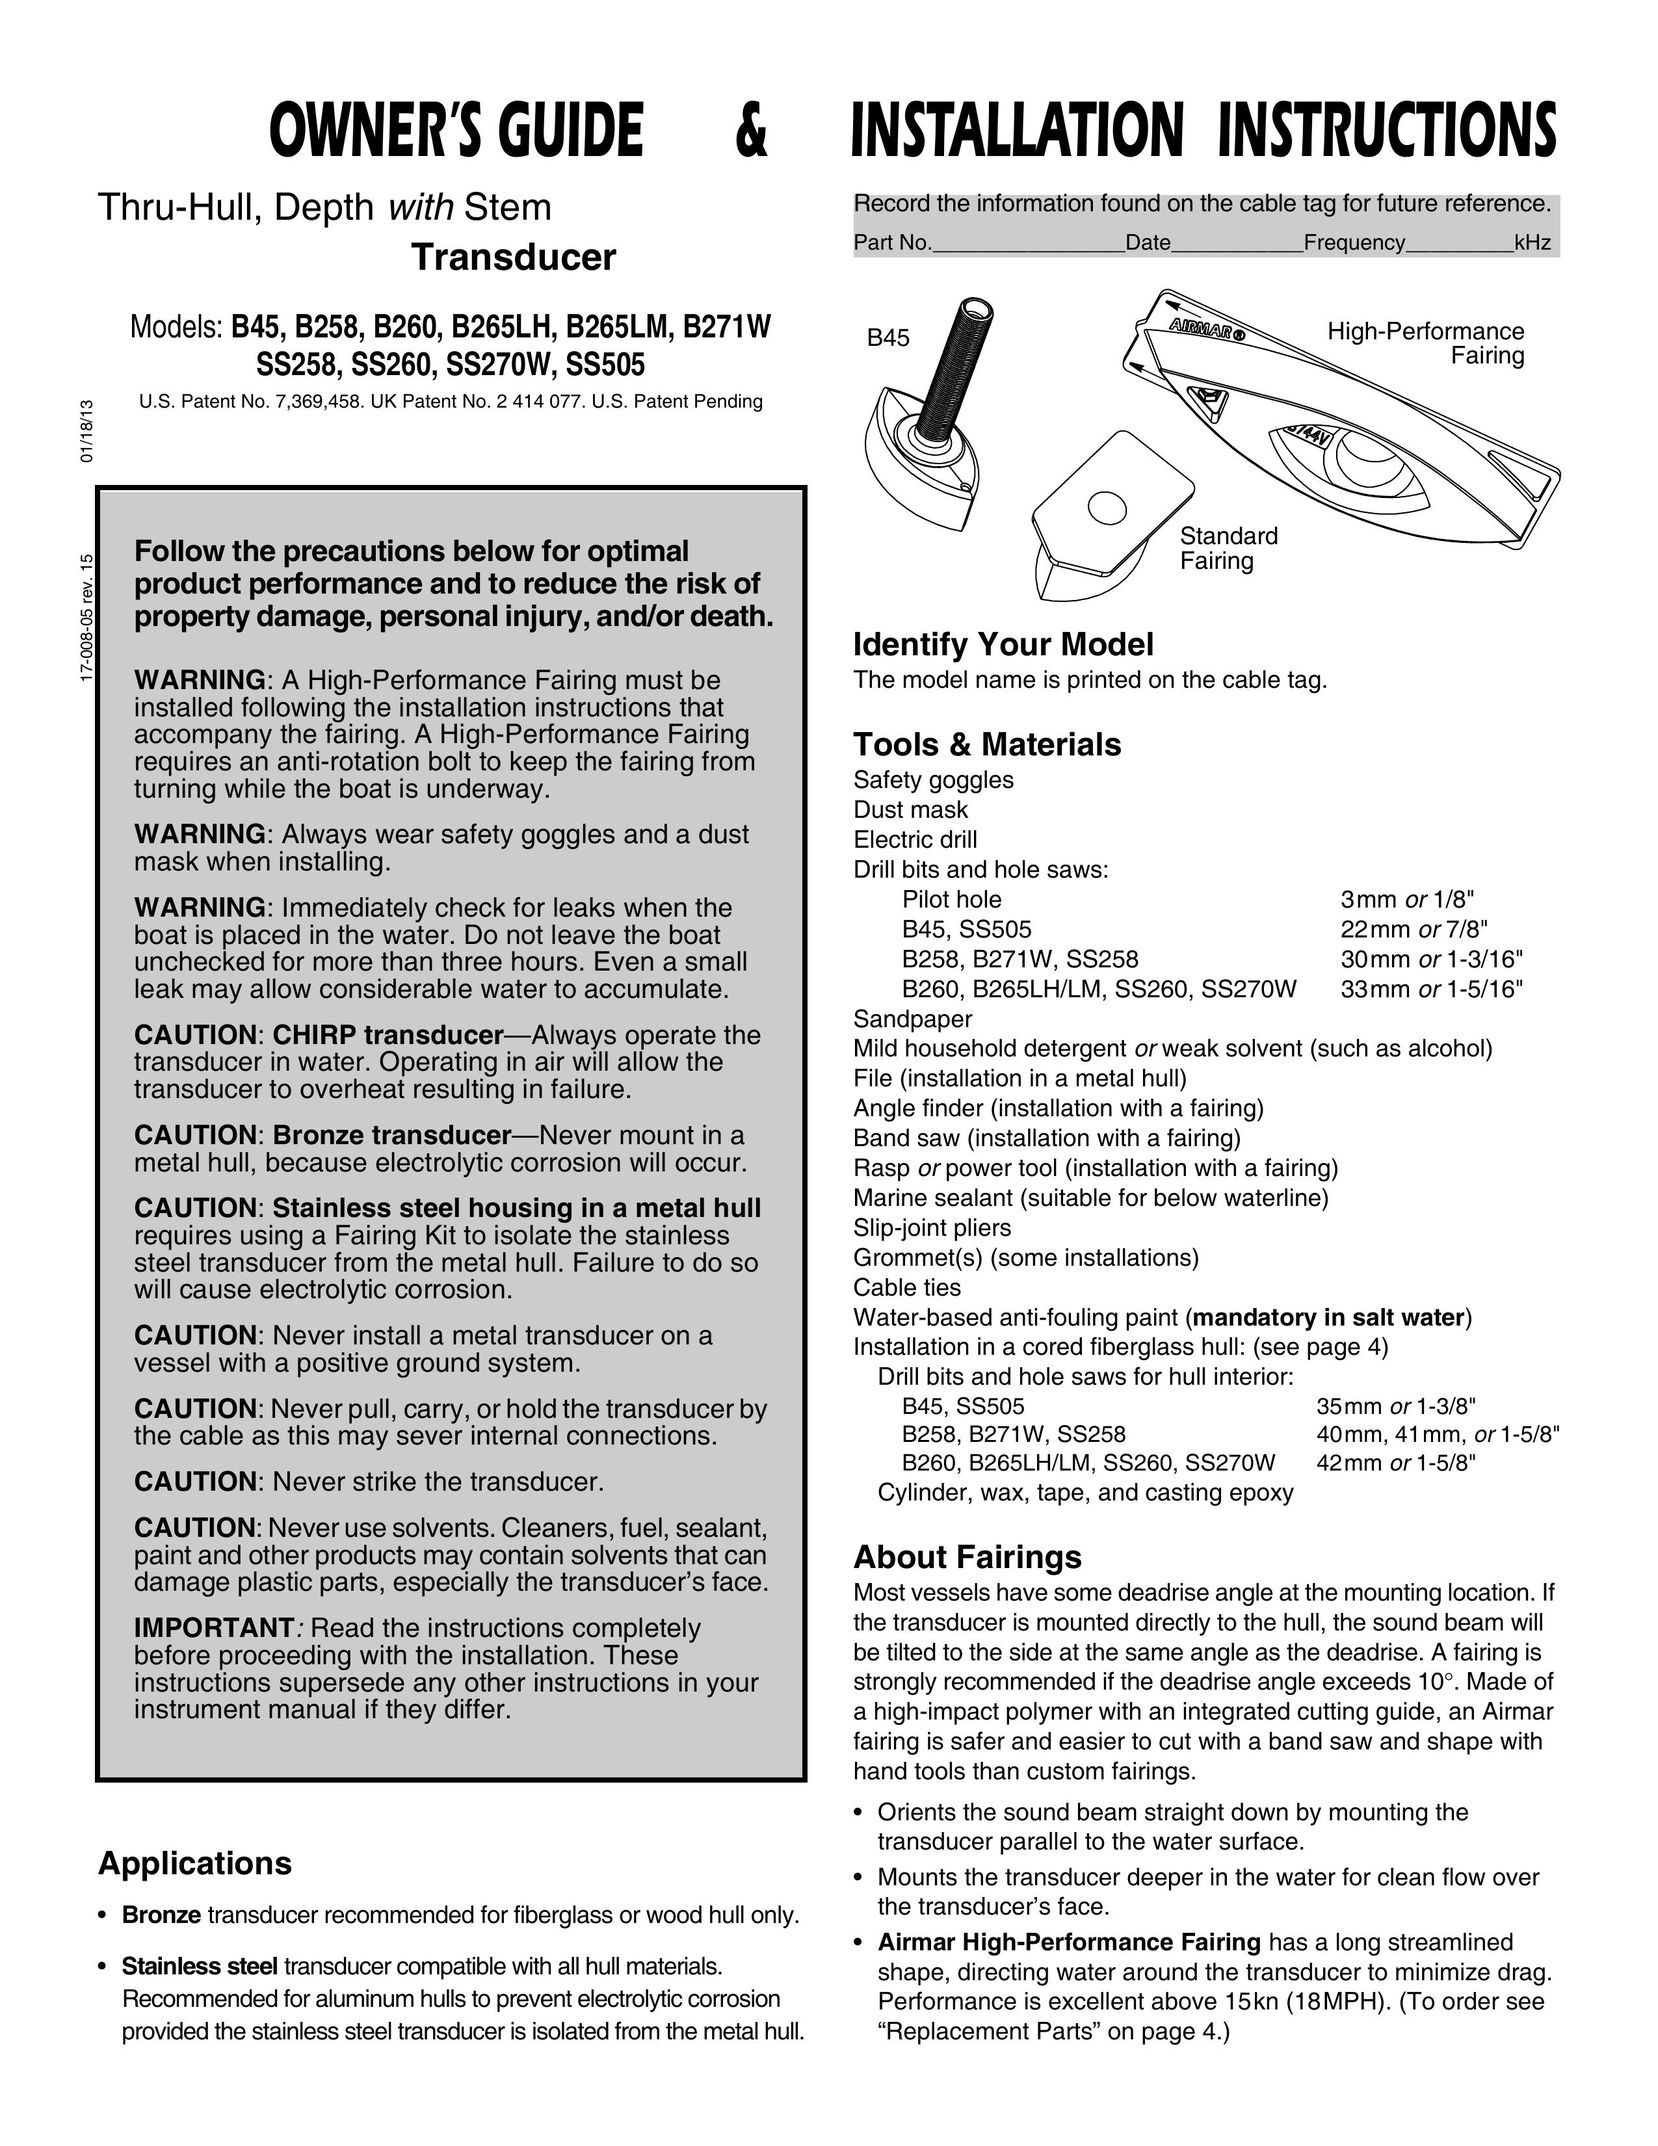 New Transducers SS505 Network Router User Manual